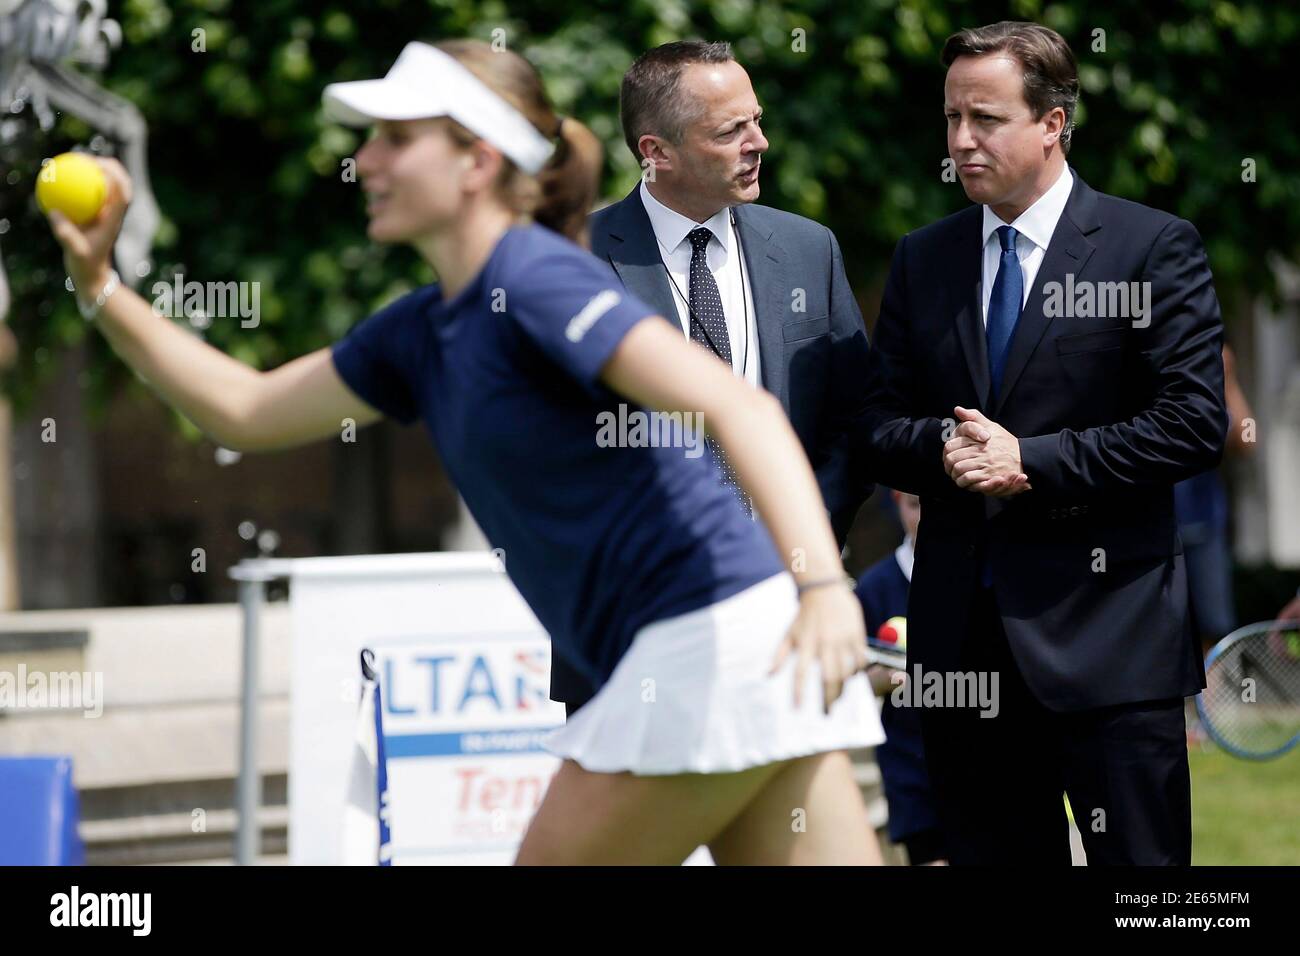 Britain's Prime Minister David Cameron (R) watches as British Number 3 female Johanna Konta plays with children at an event in the grounds of the Houses of Parliament in London June 19, 2013. The Wimbeldon tennis championships are held June 24 to July 7. REUTERS/Matthew Lloyd/POOL  (BRITAIN - Tags: SPORT TENNIS POLITICS) Stock Photo